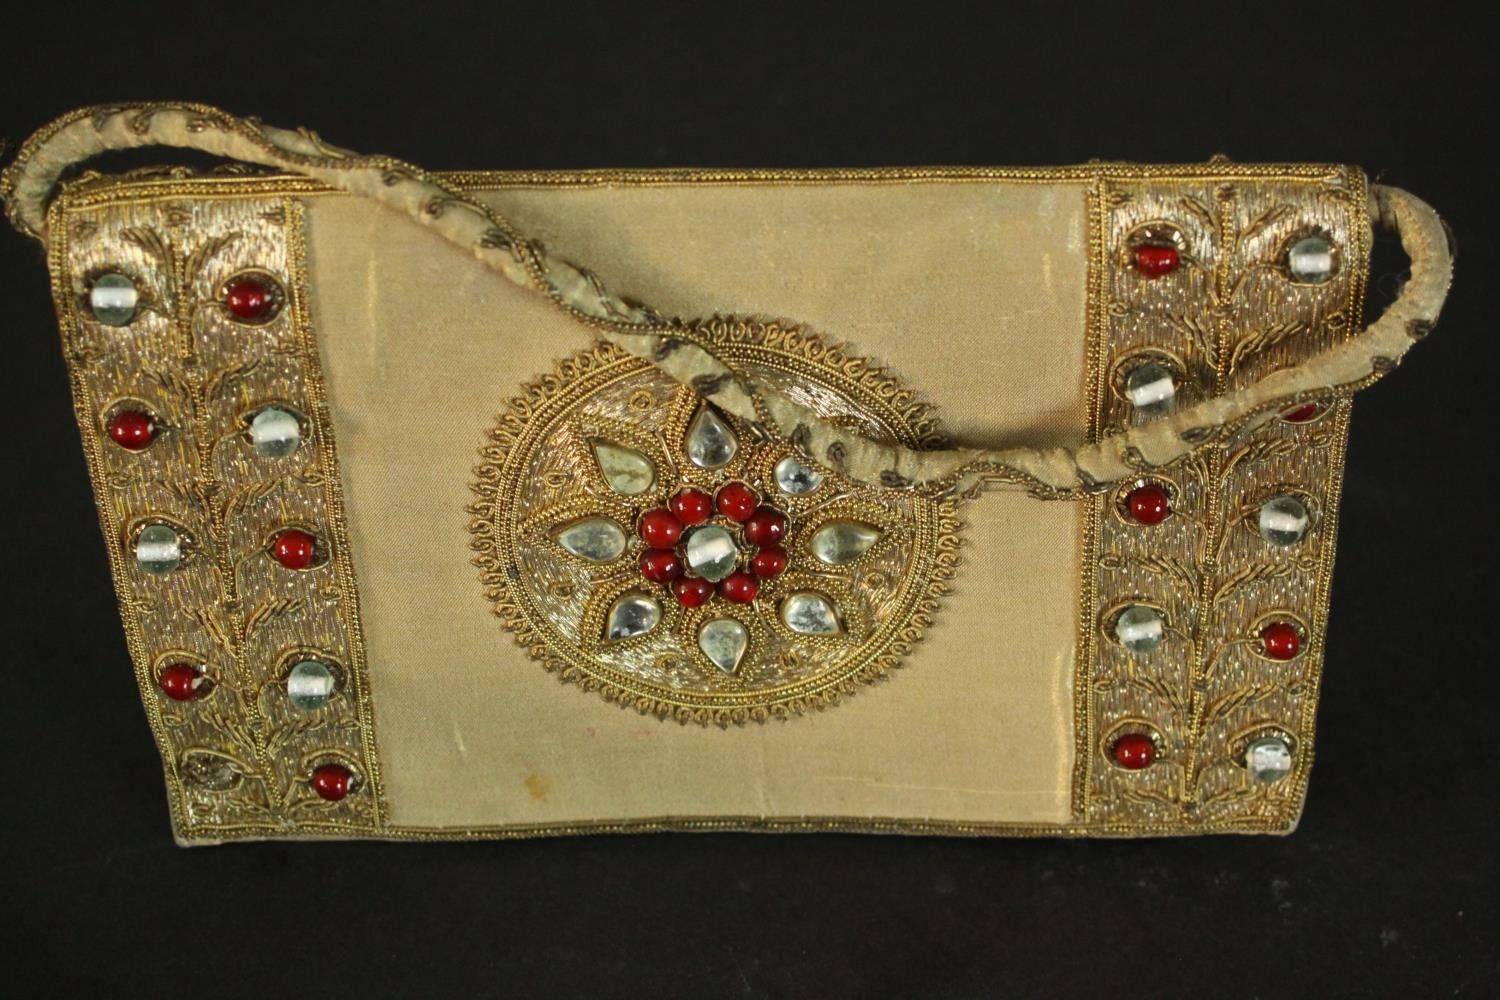 Two vintage clutch handbags, including an Indian gold brocade and glass cabochon detailed evening - Image 8 of 10